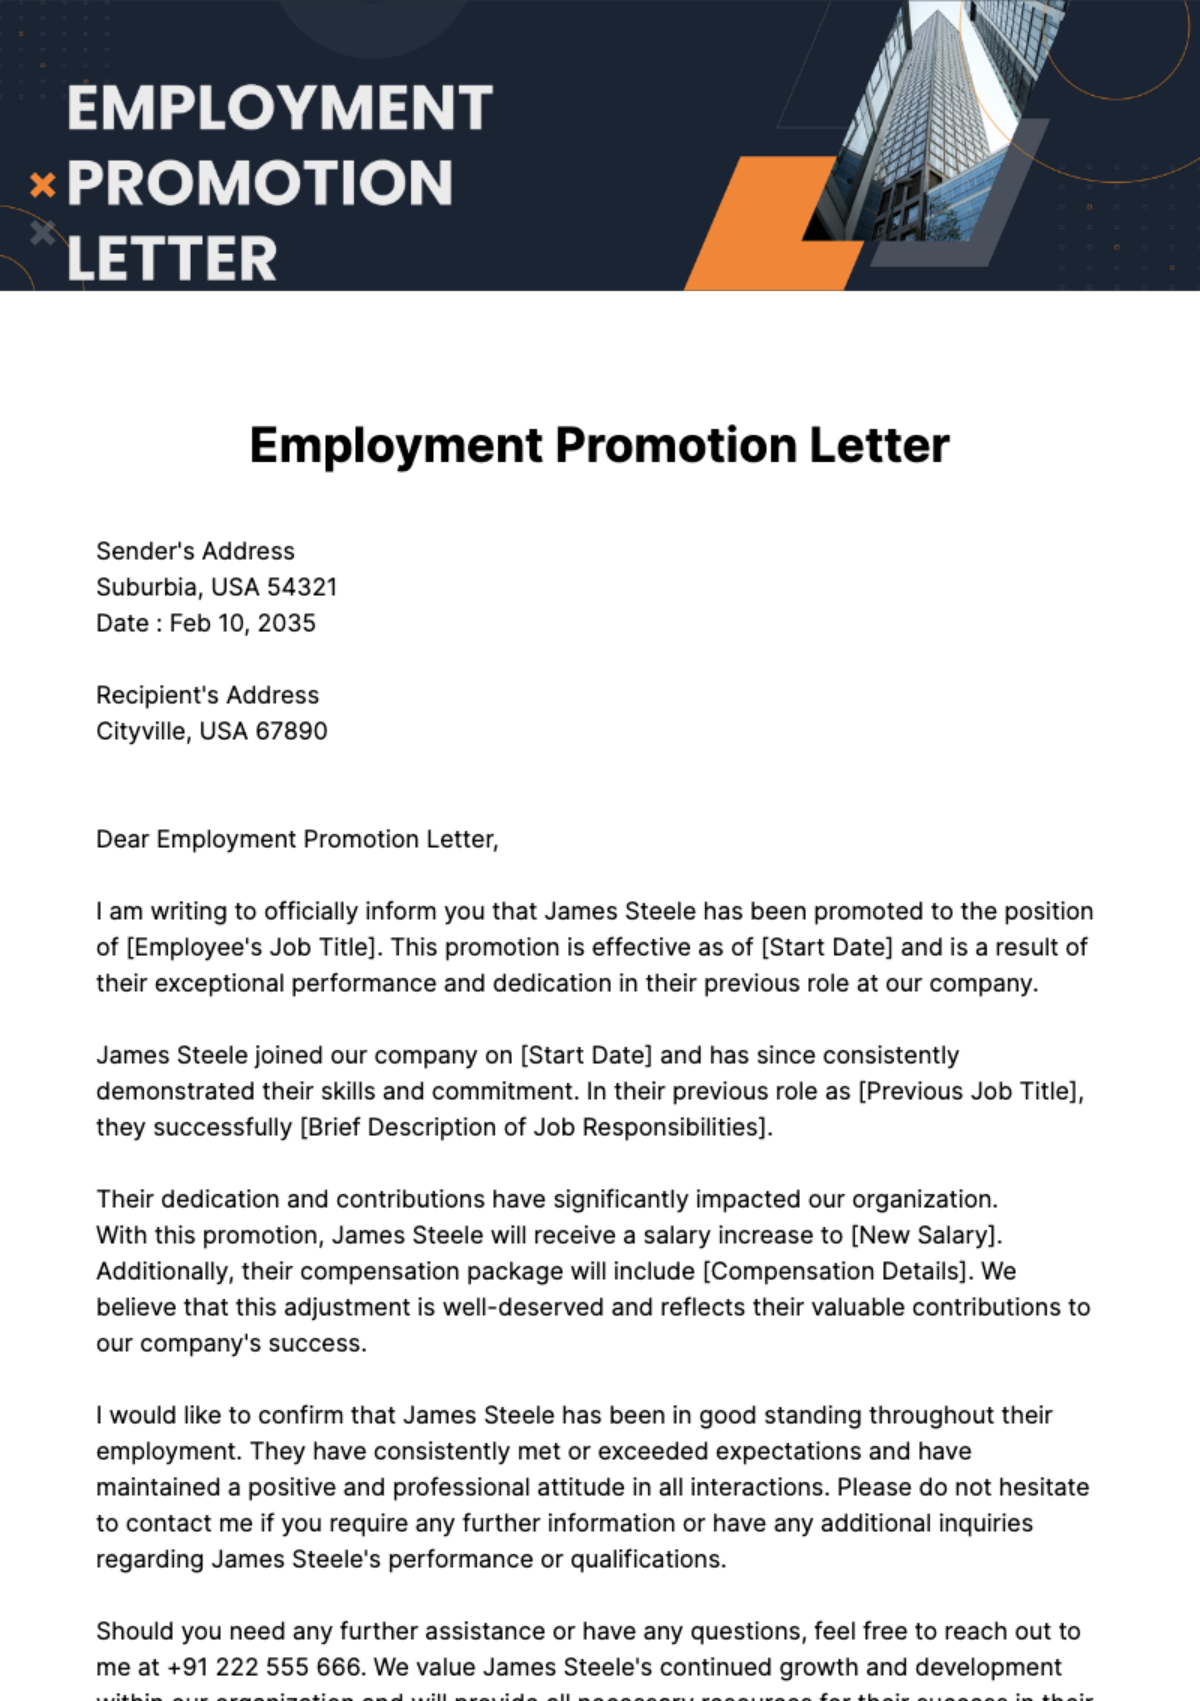 Employment Promotion Letter Template